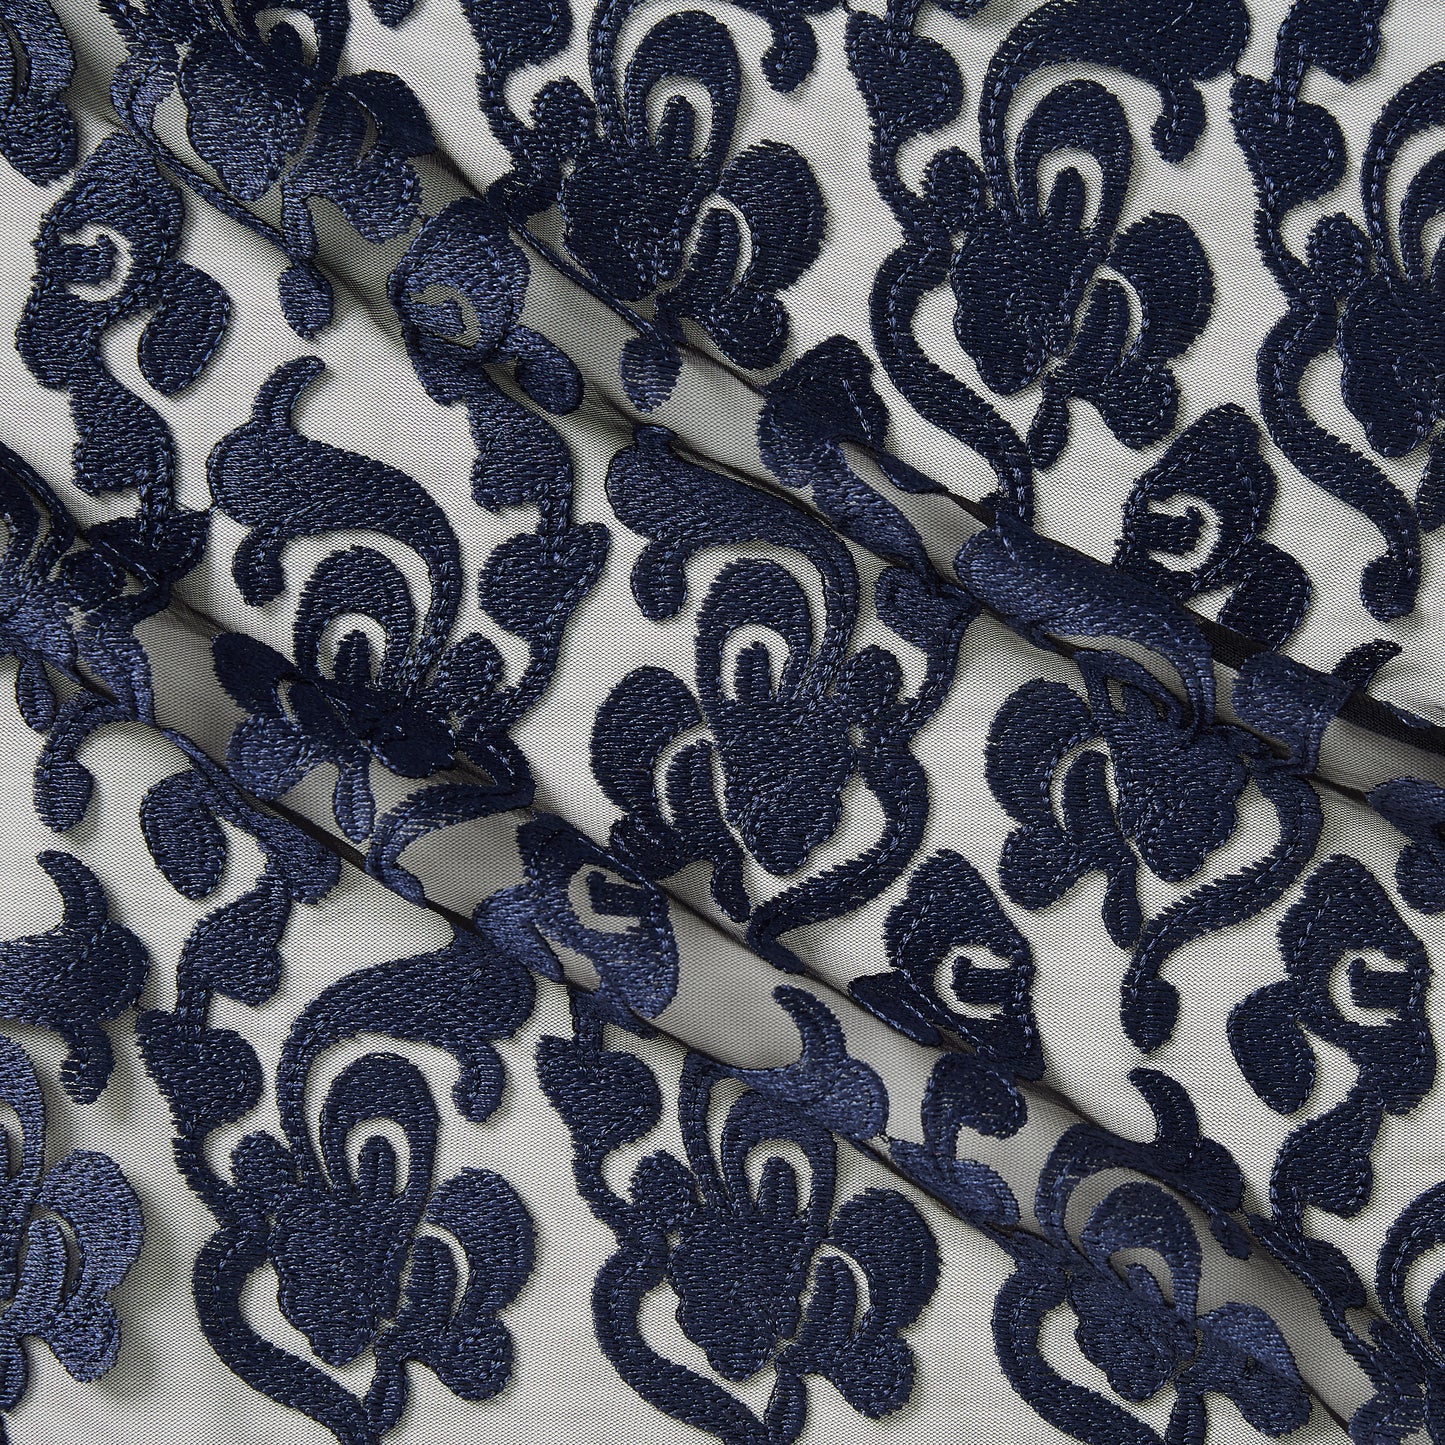 brooklyn showing the navy color version floral embroidery on rayon and polyester mesh base